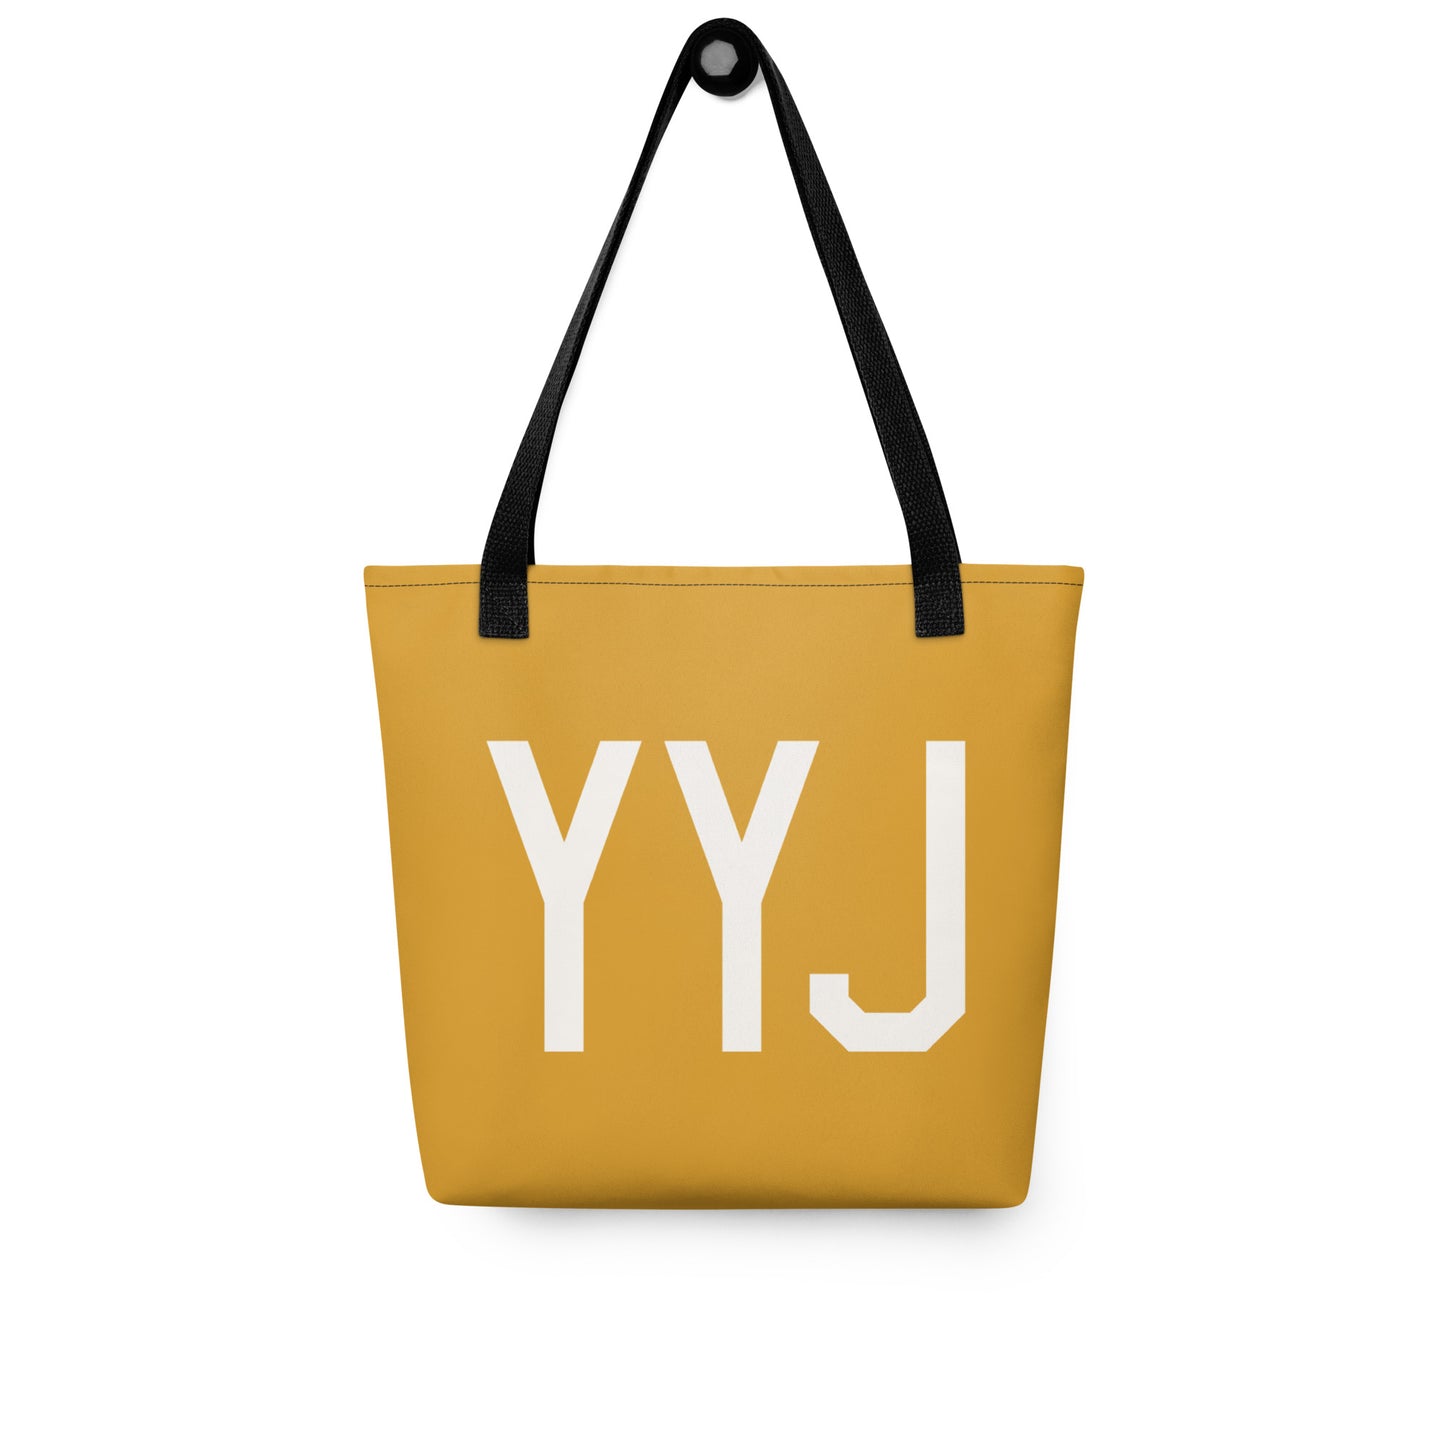 Aviation Gift Tote Bag - Buttercup • YYJ Victoria • YHM Designs - Image 03